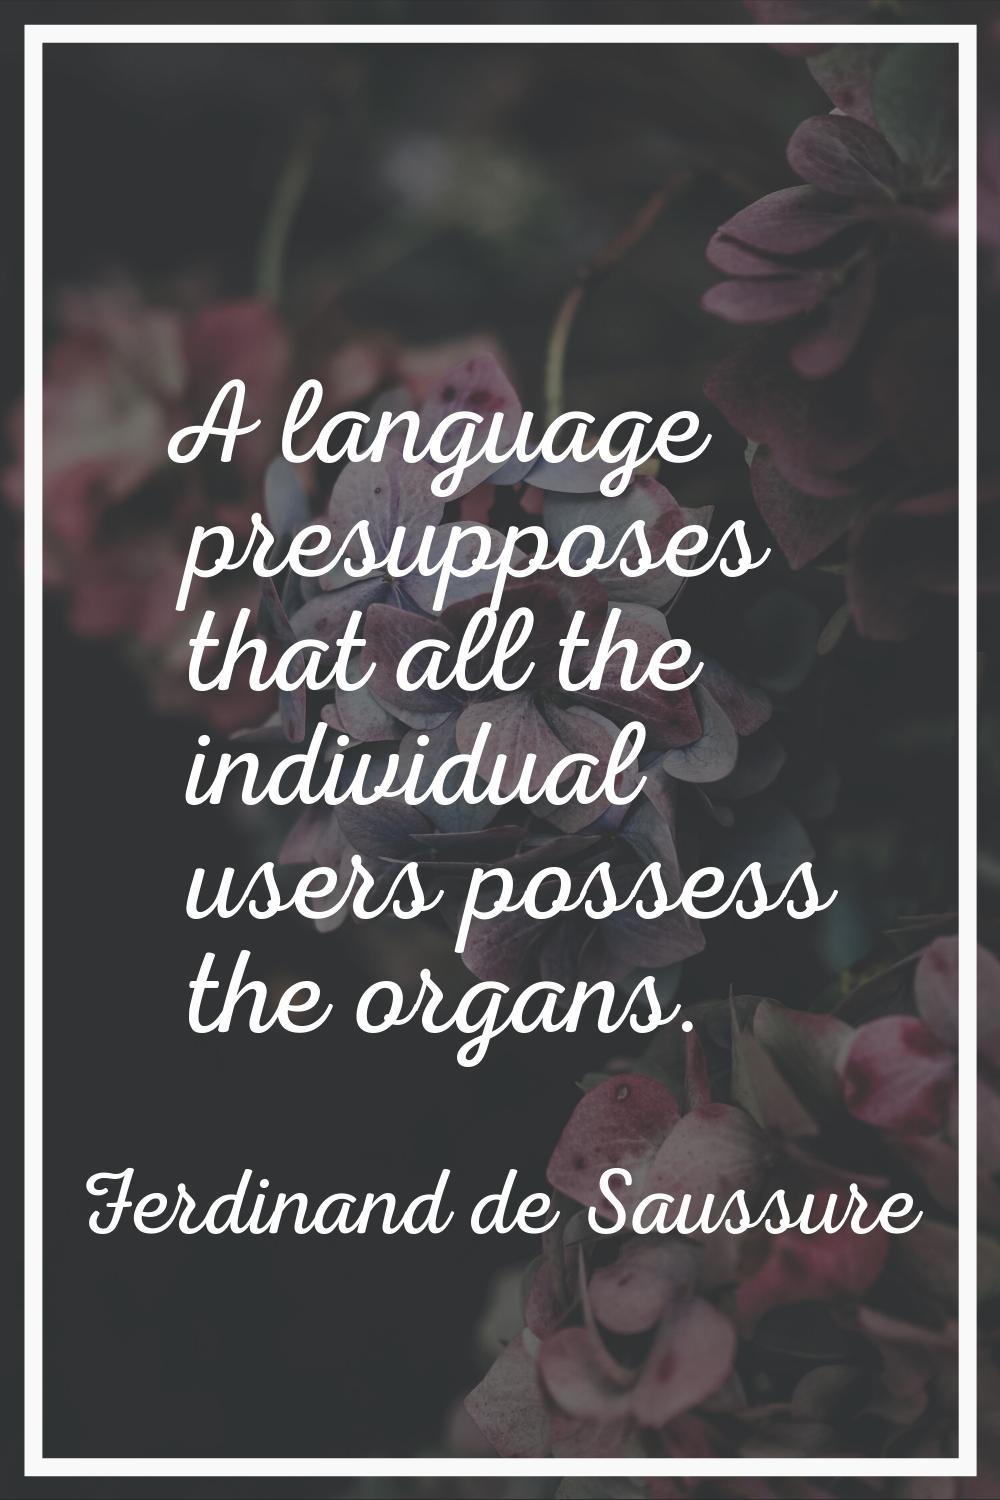 A language presupposes that all the individual users possess the organs.